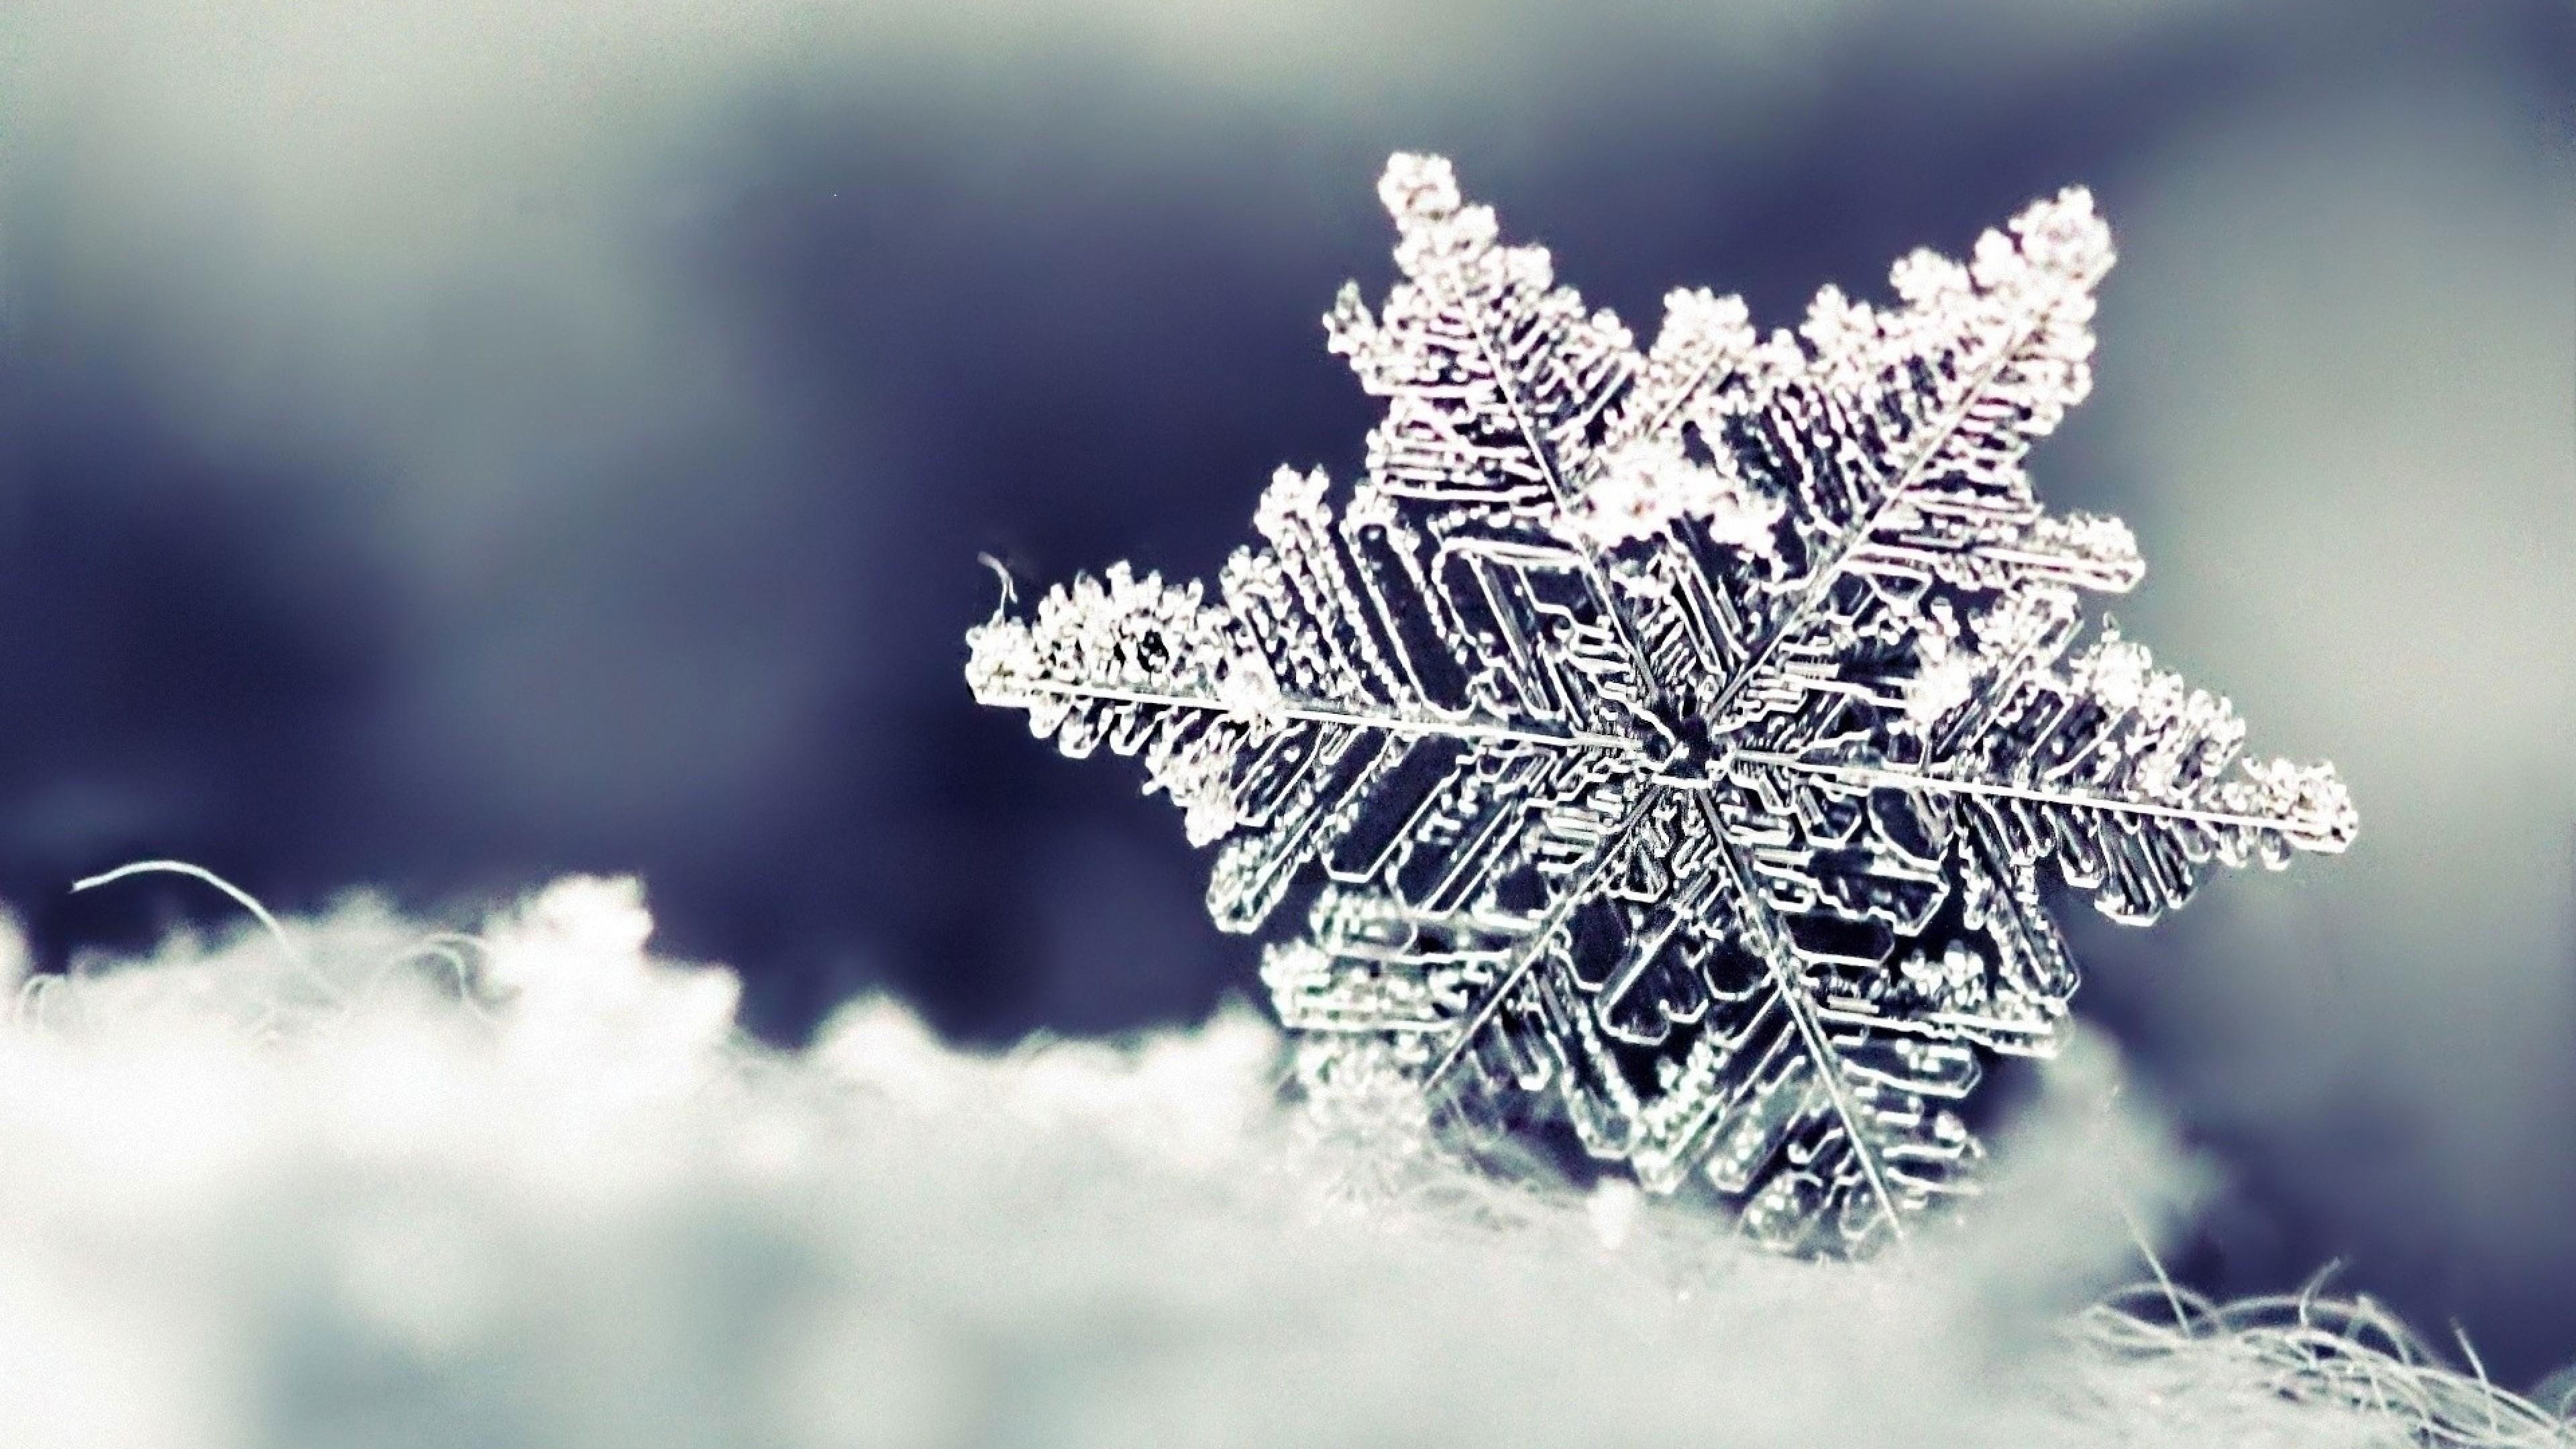 A snowflake is sitting on top of some white stuff - Snowflake